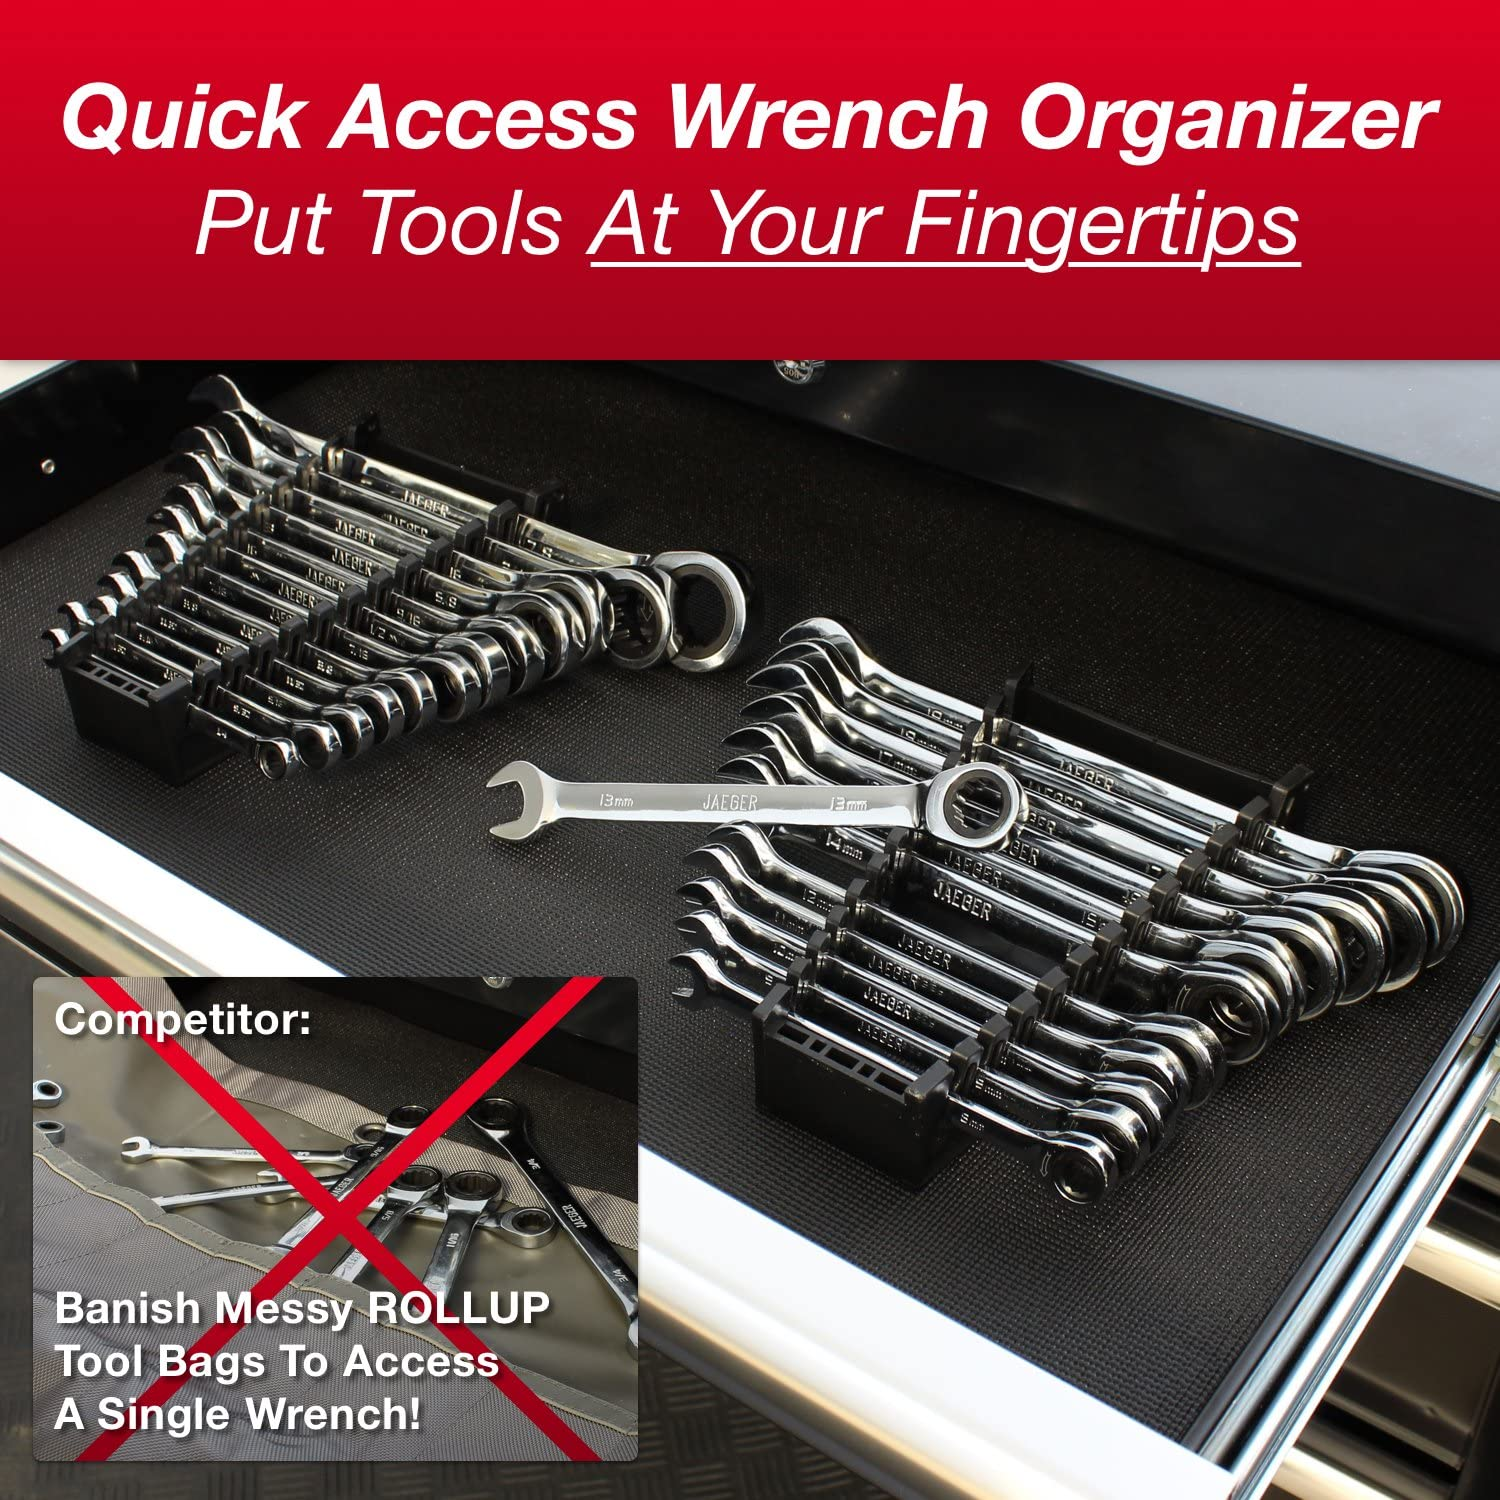 24Pc IN/MM TIGHTSPOT Ratcheting Wrench Set - MASTER SET Including Inch & Metric with Quick Access Wrench Organizer - Our Standard in Combination Wrench Sets from Gear to Tip